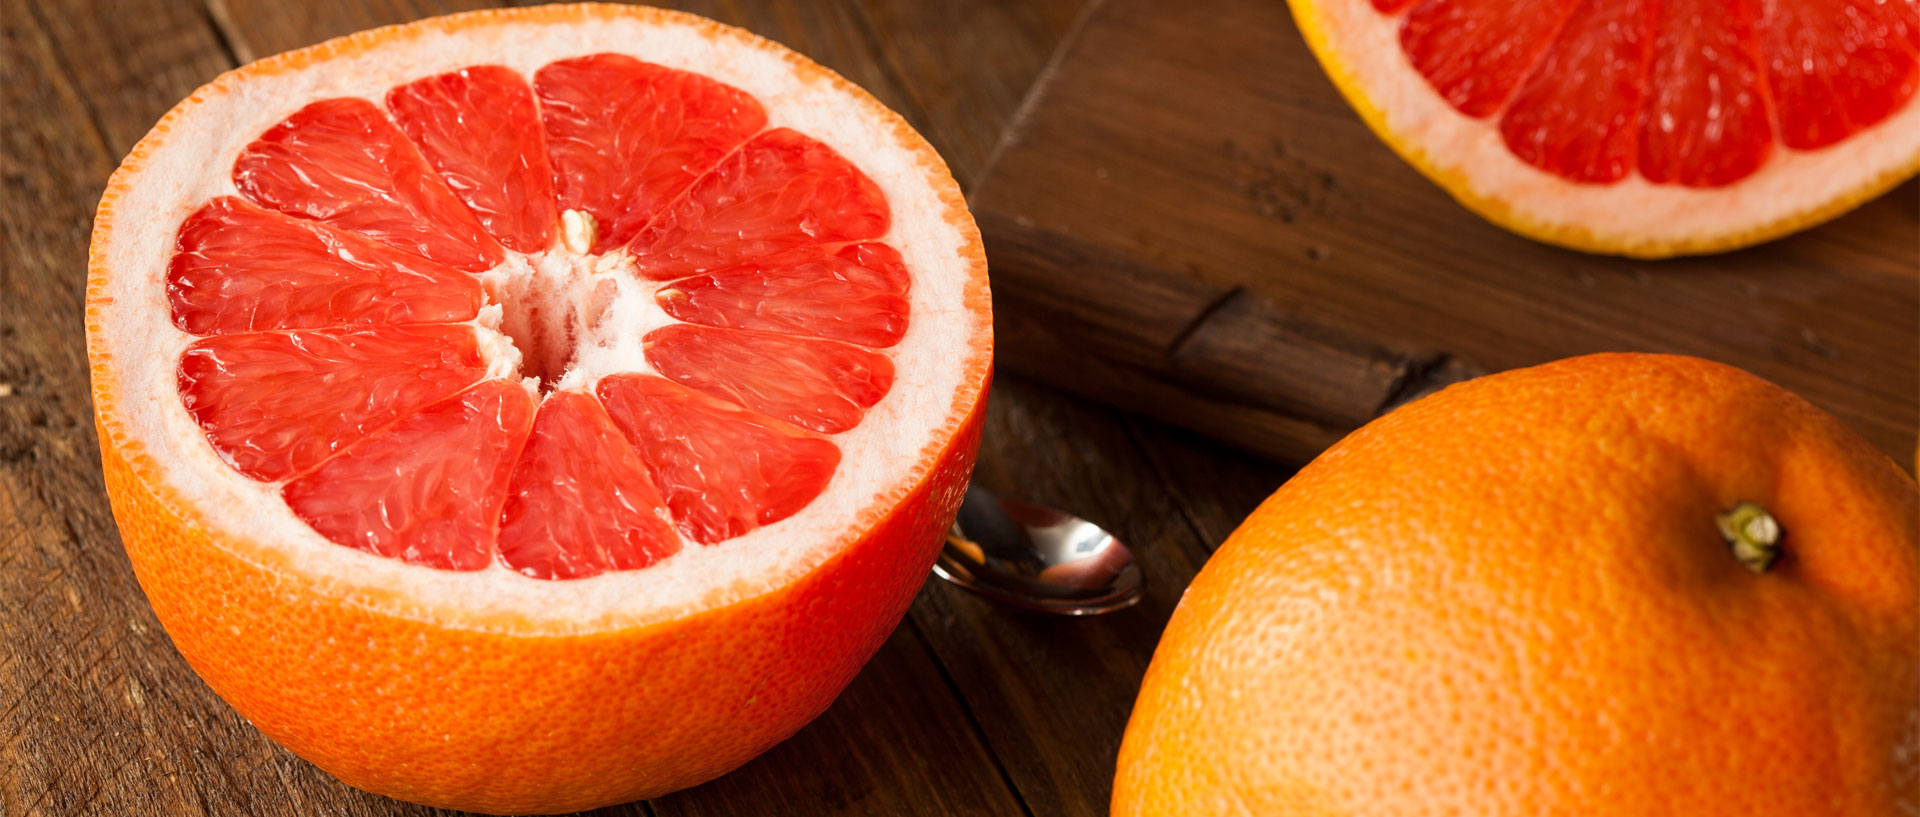 does grapefruit juice interact with xanax